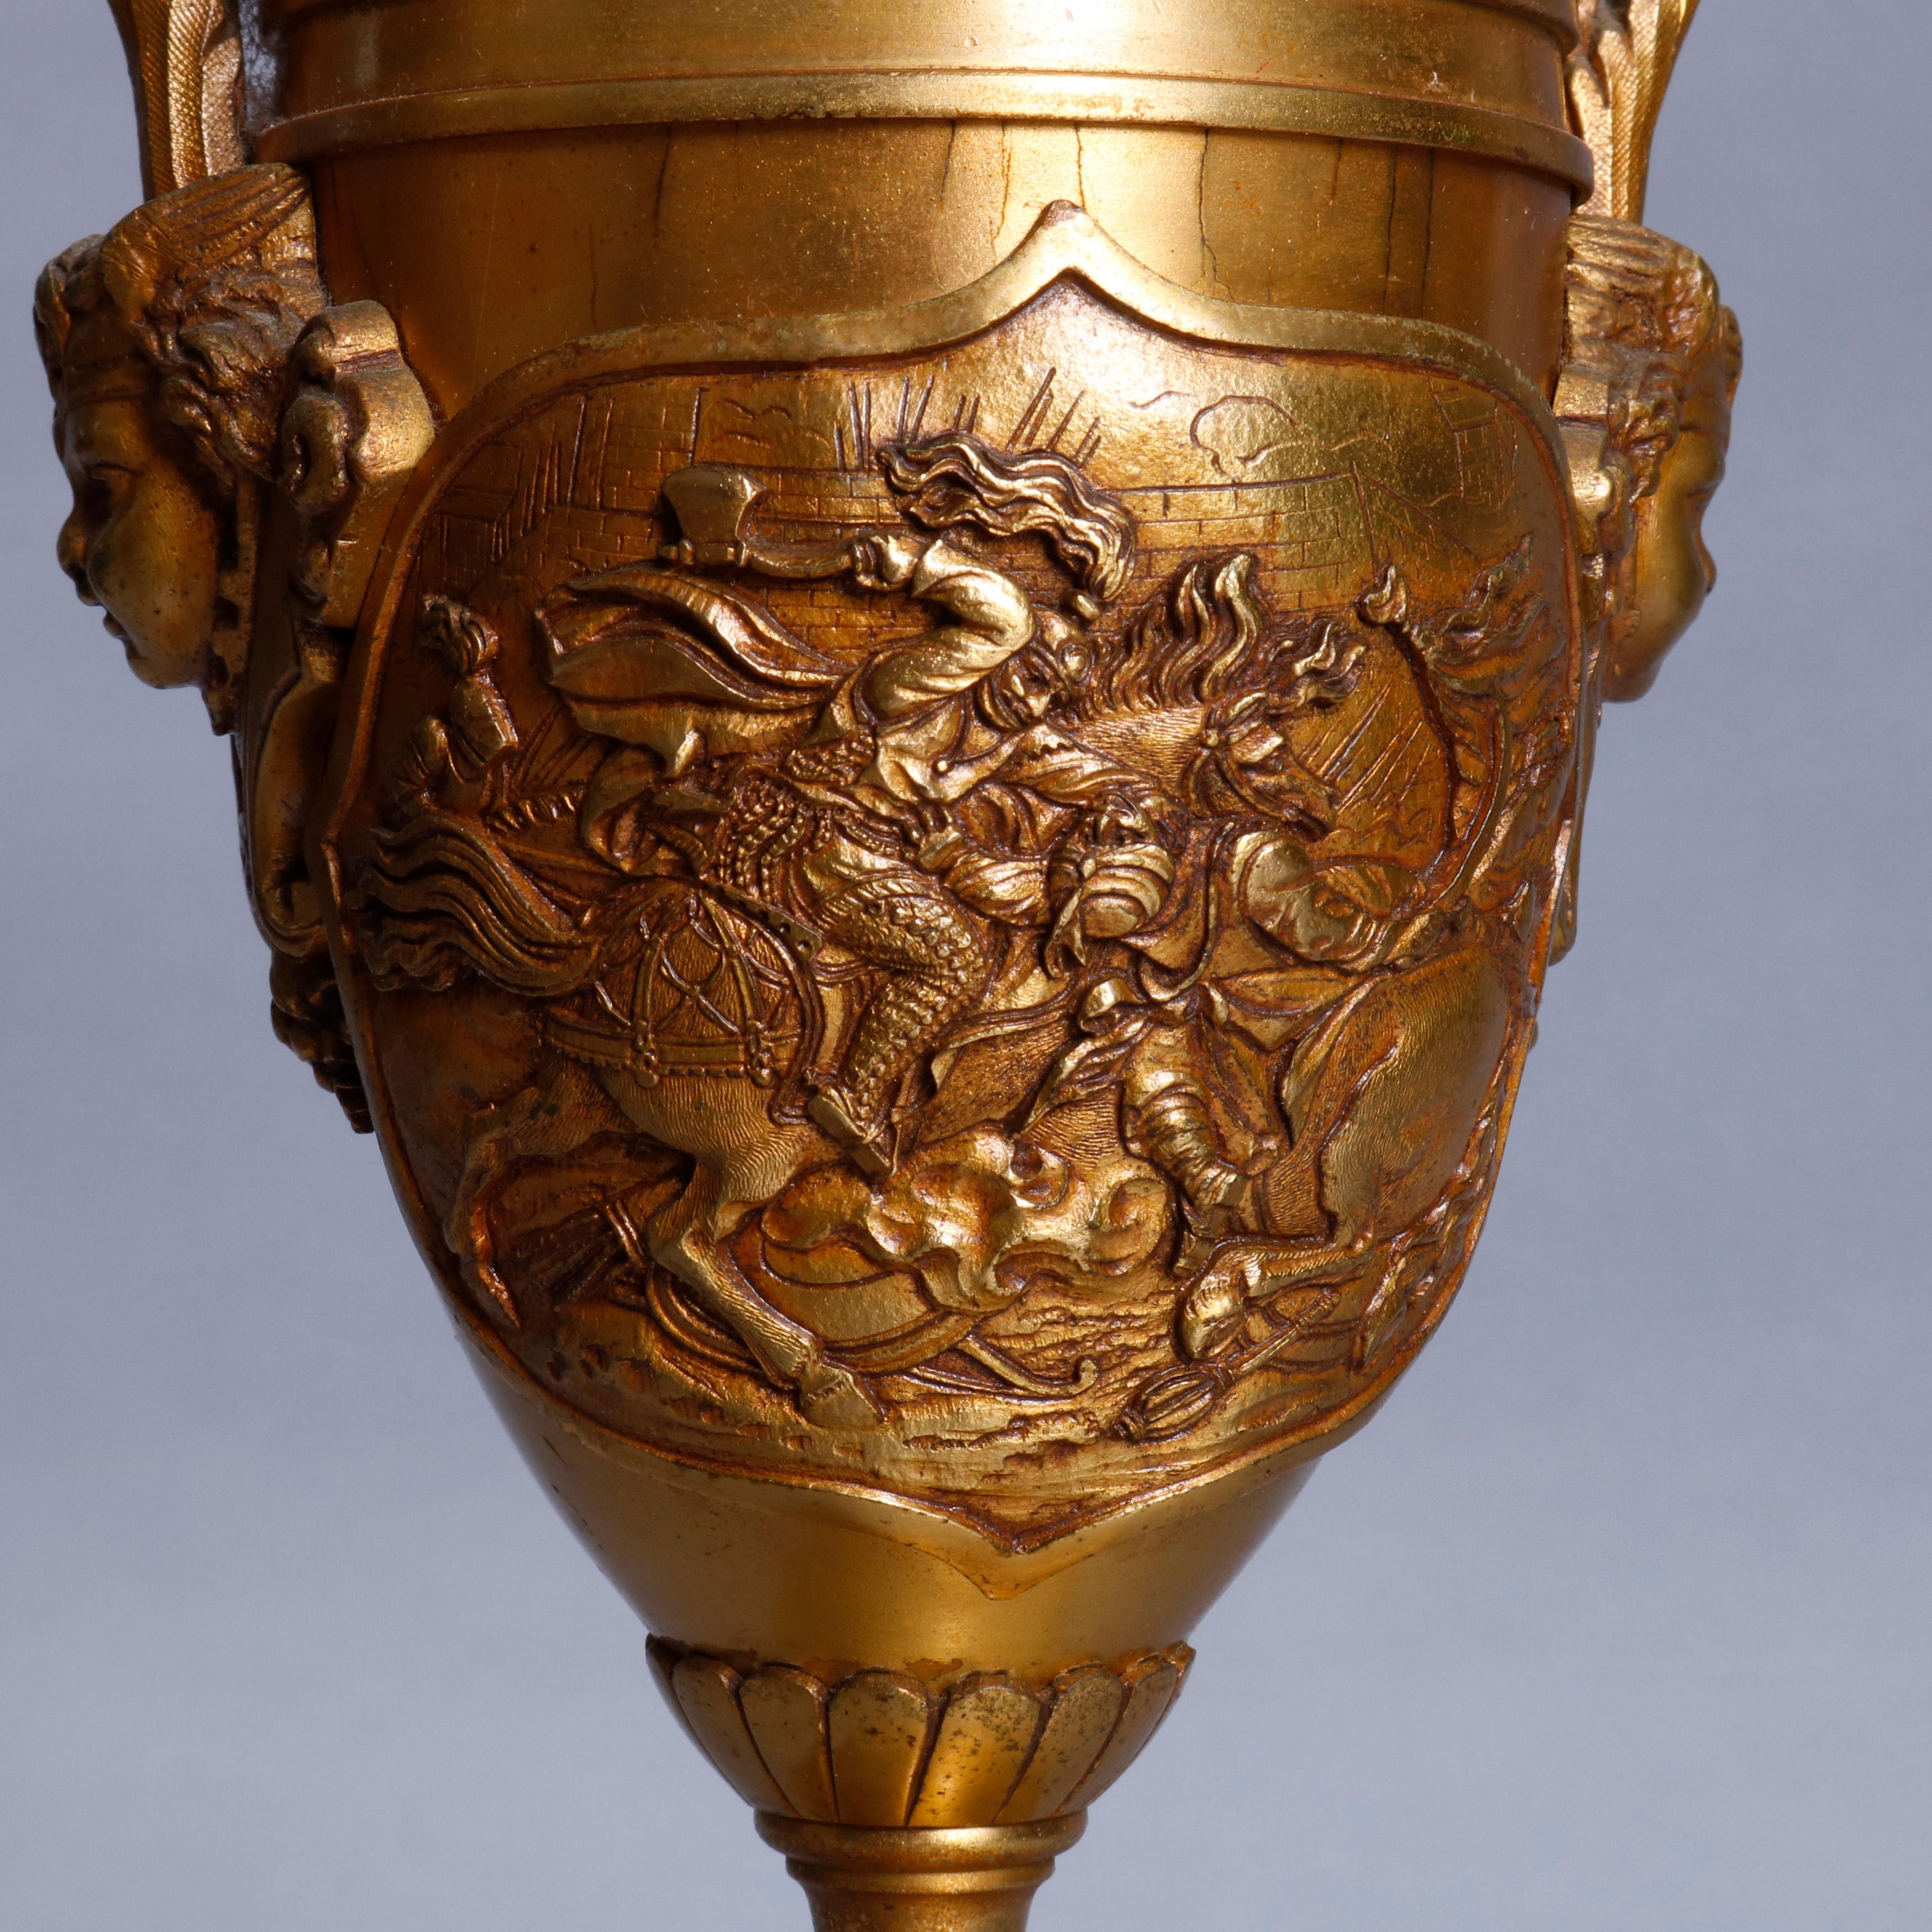 An antique table lamp offers cast and gilt bronze construction in urn form with a reserve depicting an Asian or Moorish battle scene in relief, double Neoclassical cherub mask handles, raised on a stepped and footed plinth having the upside down